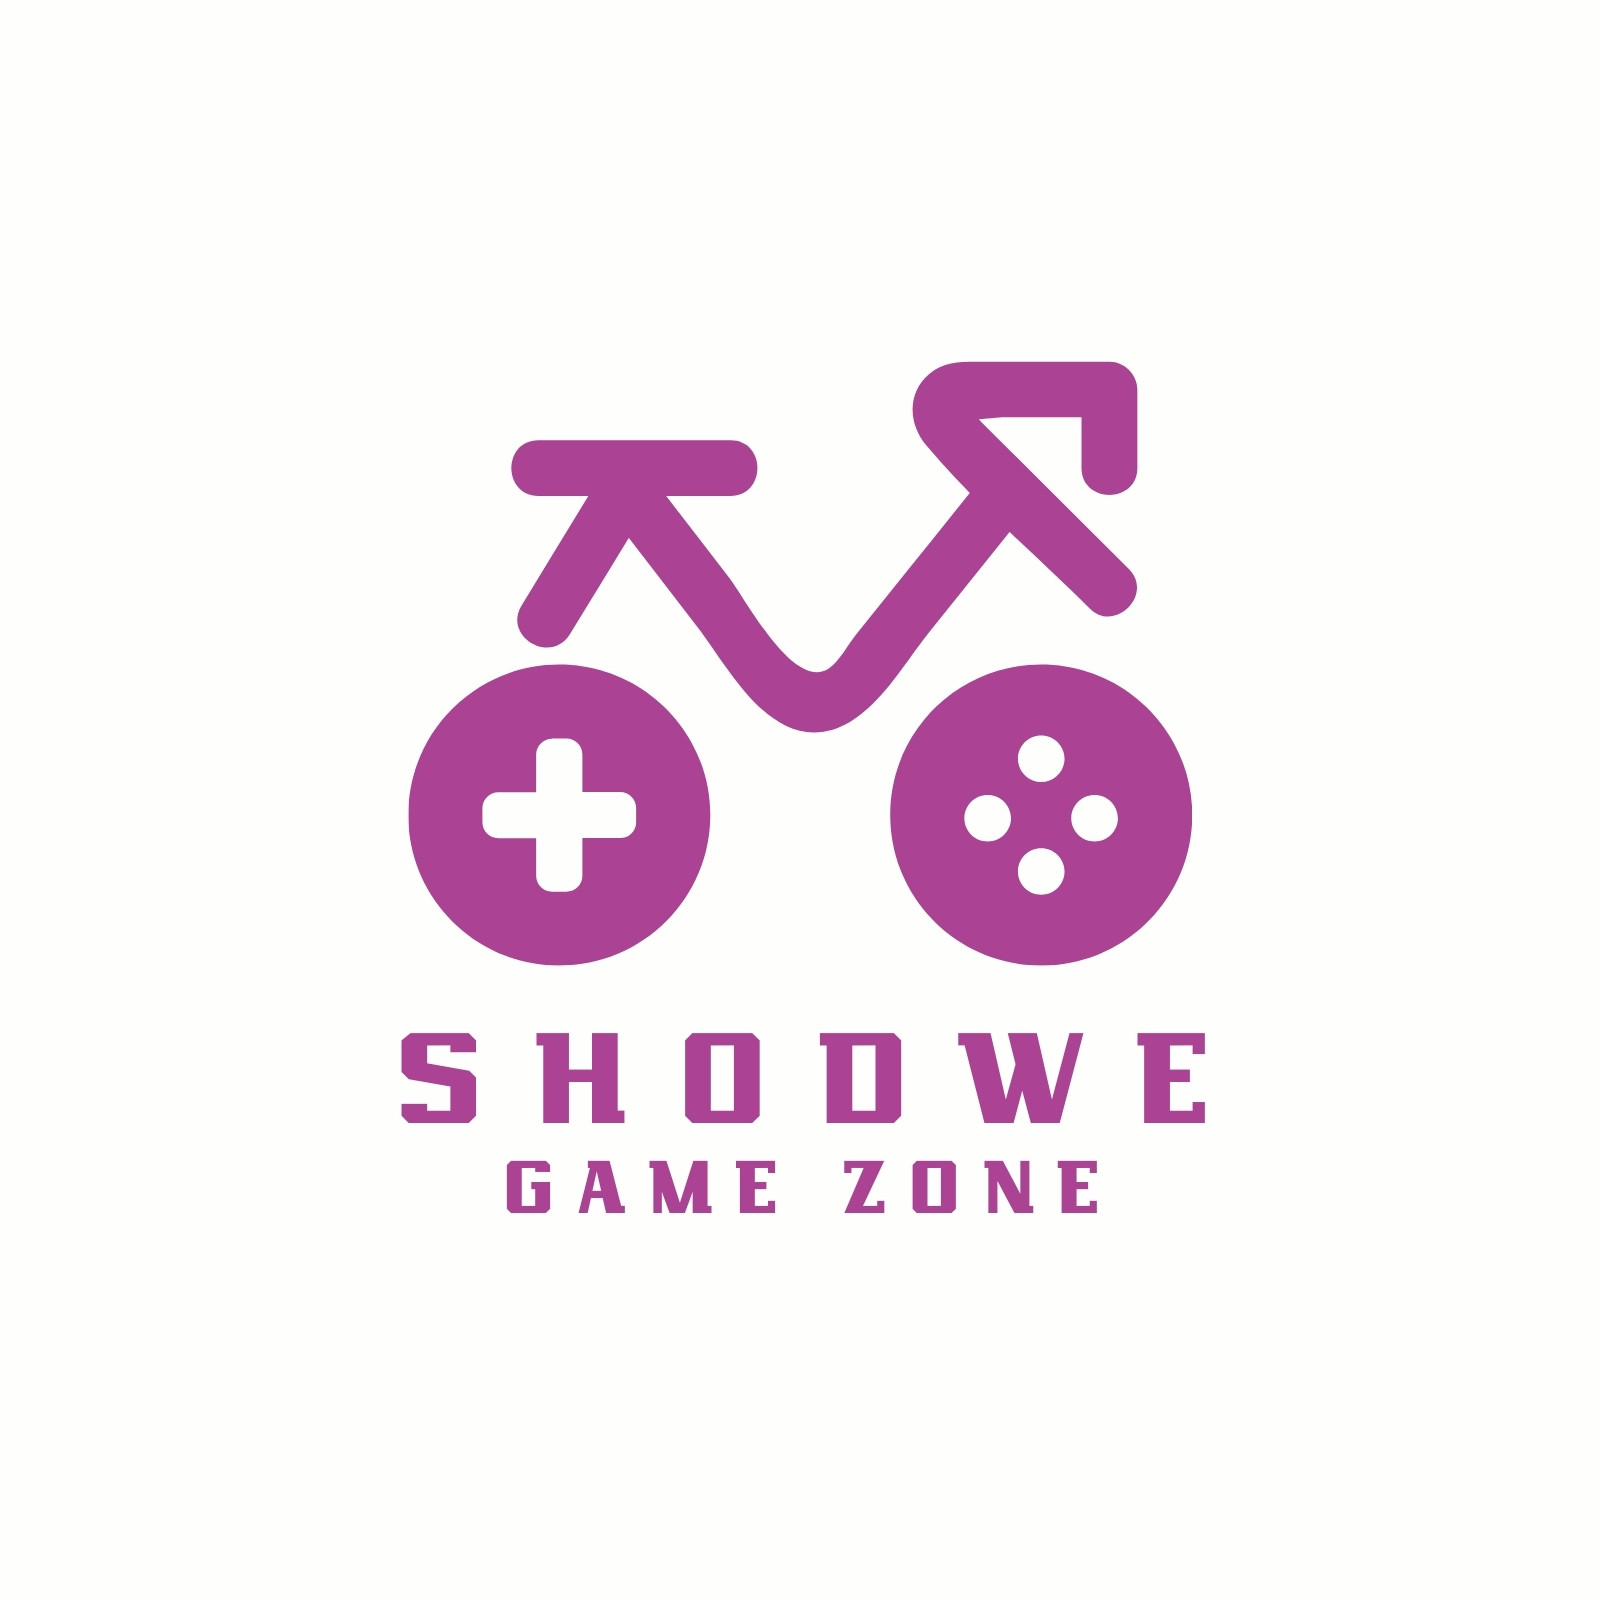 Game Zone Design Graphic by Pexelpy · Creative Fabrica